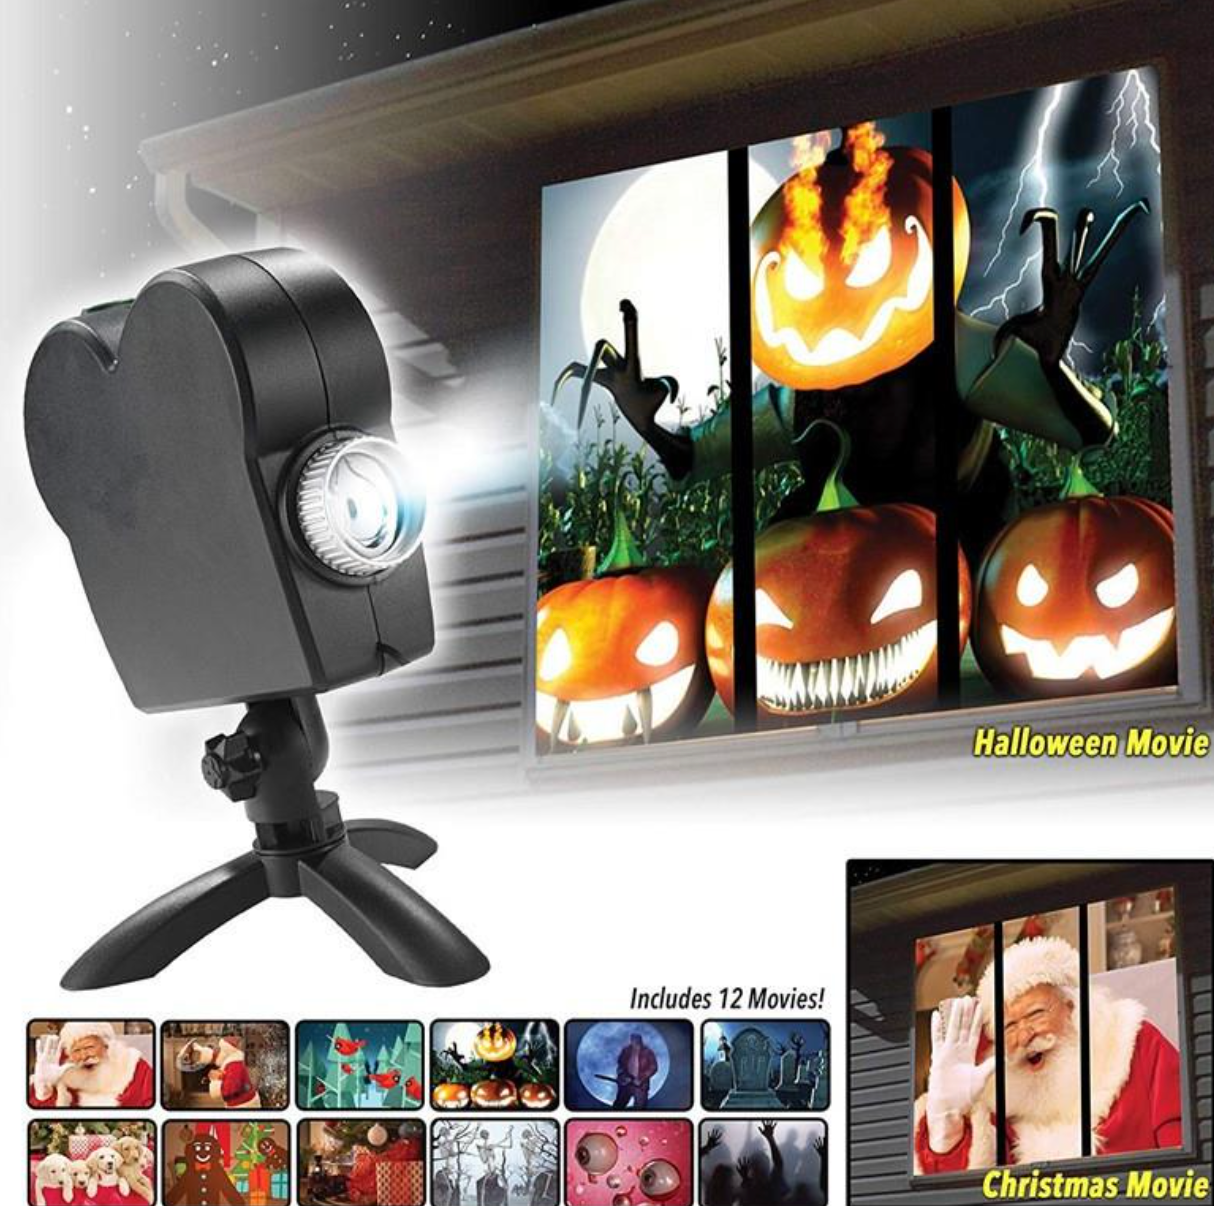 Haunted™ Halloween Laser Projector | Includes 12 Movies!